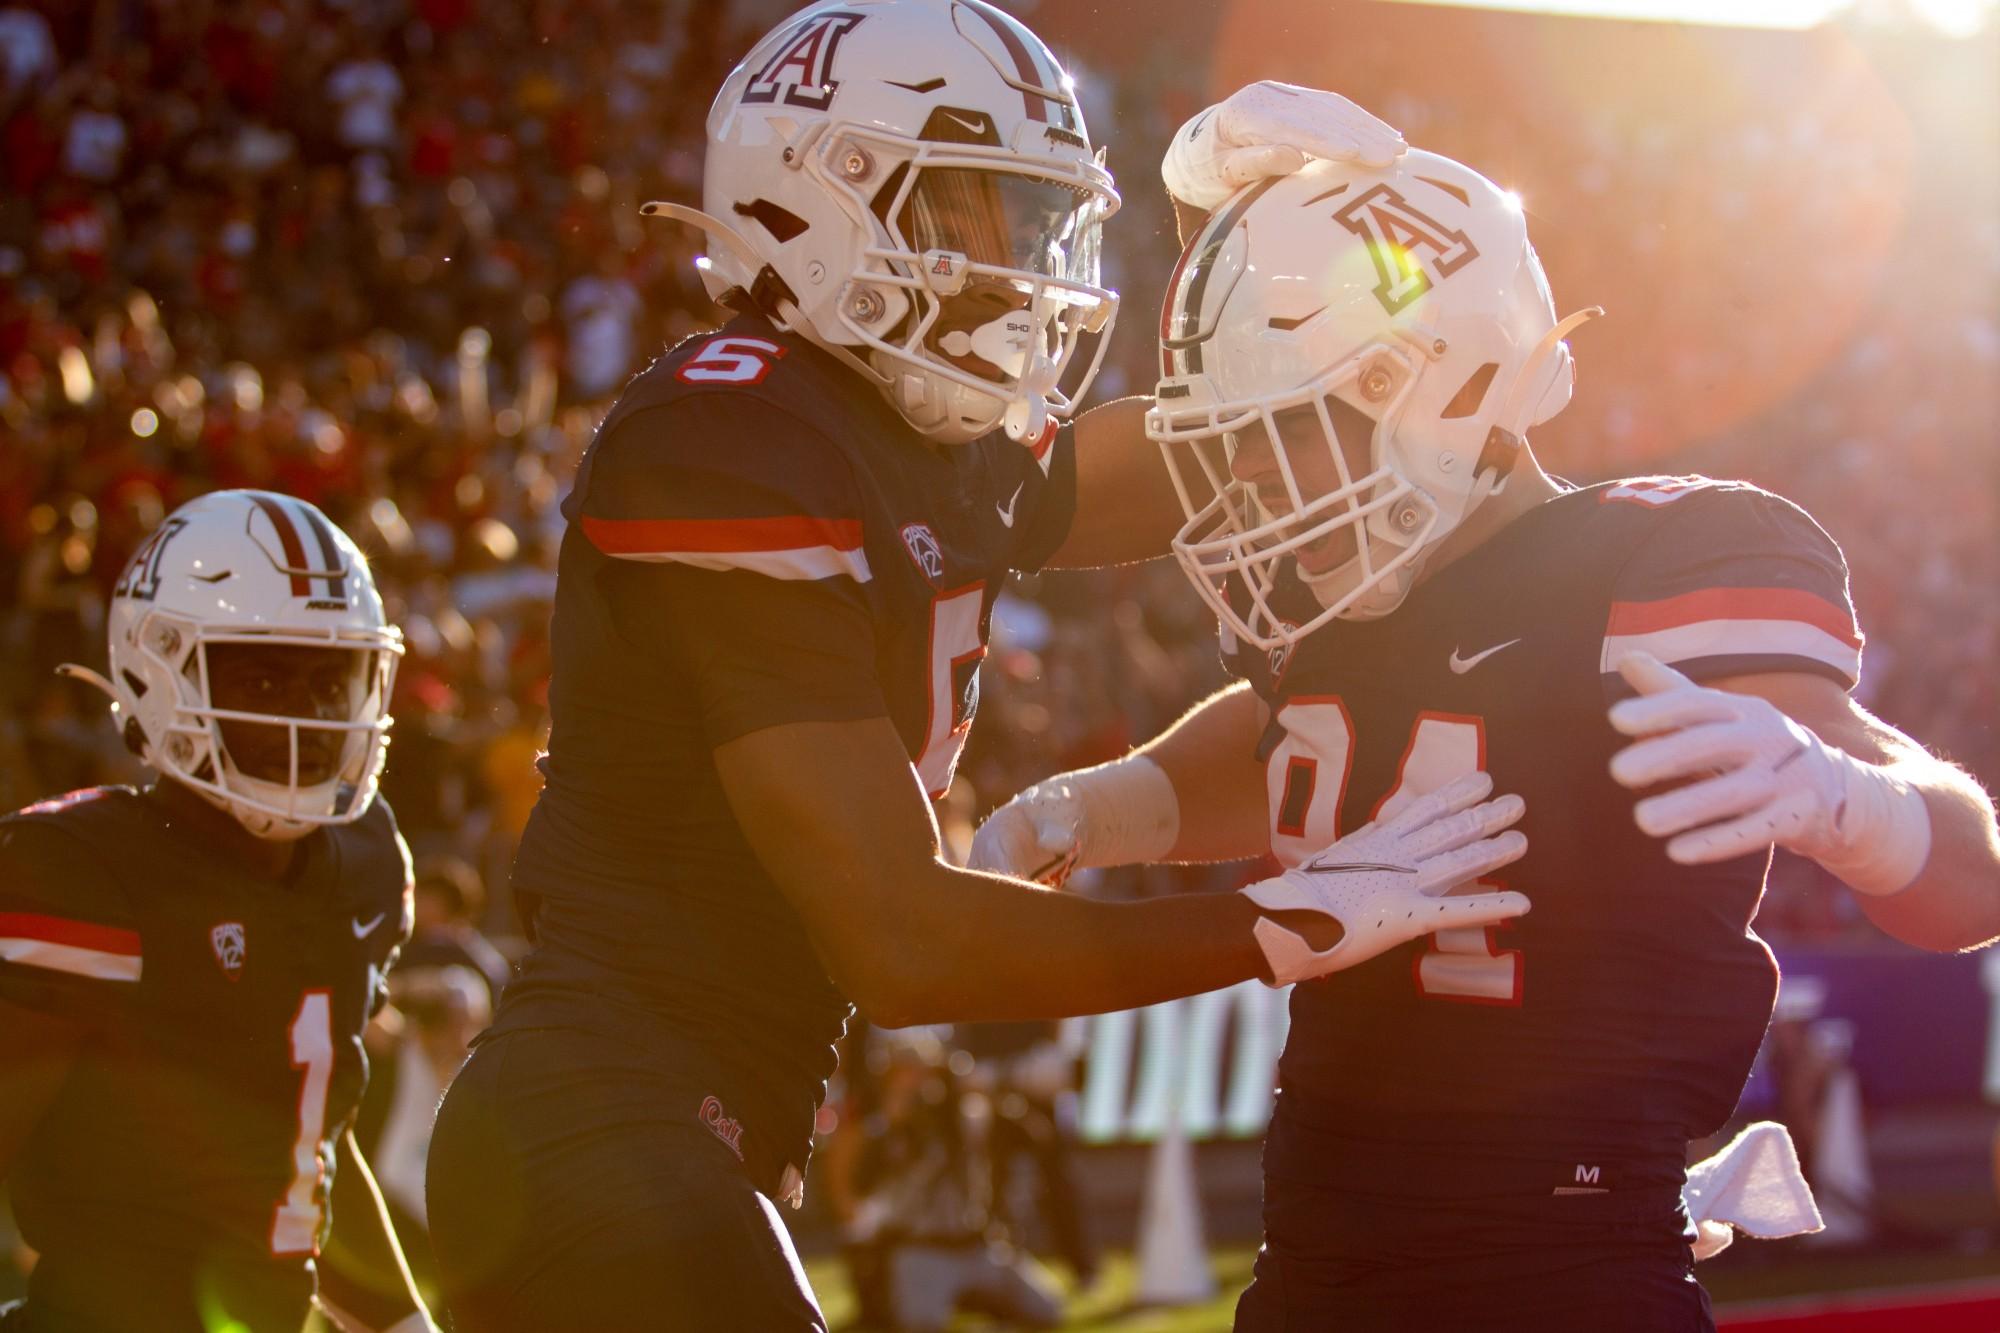 Dorian Singer (5) and Tanner McLachlan (84) celebrate a touchdown in a game against USC on Oct. 29 at Arizona Stadium. The Wildcats would go on to lose the game 37-45.